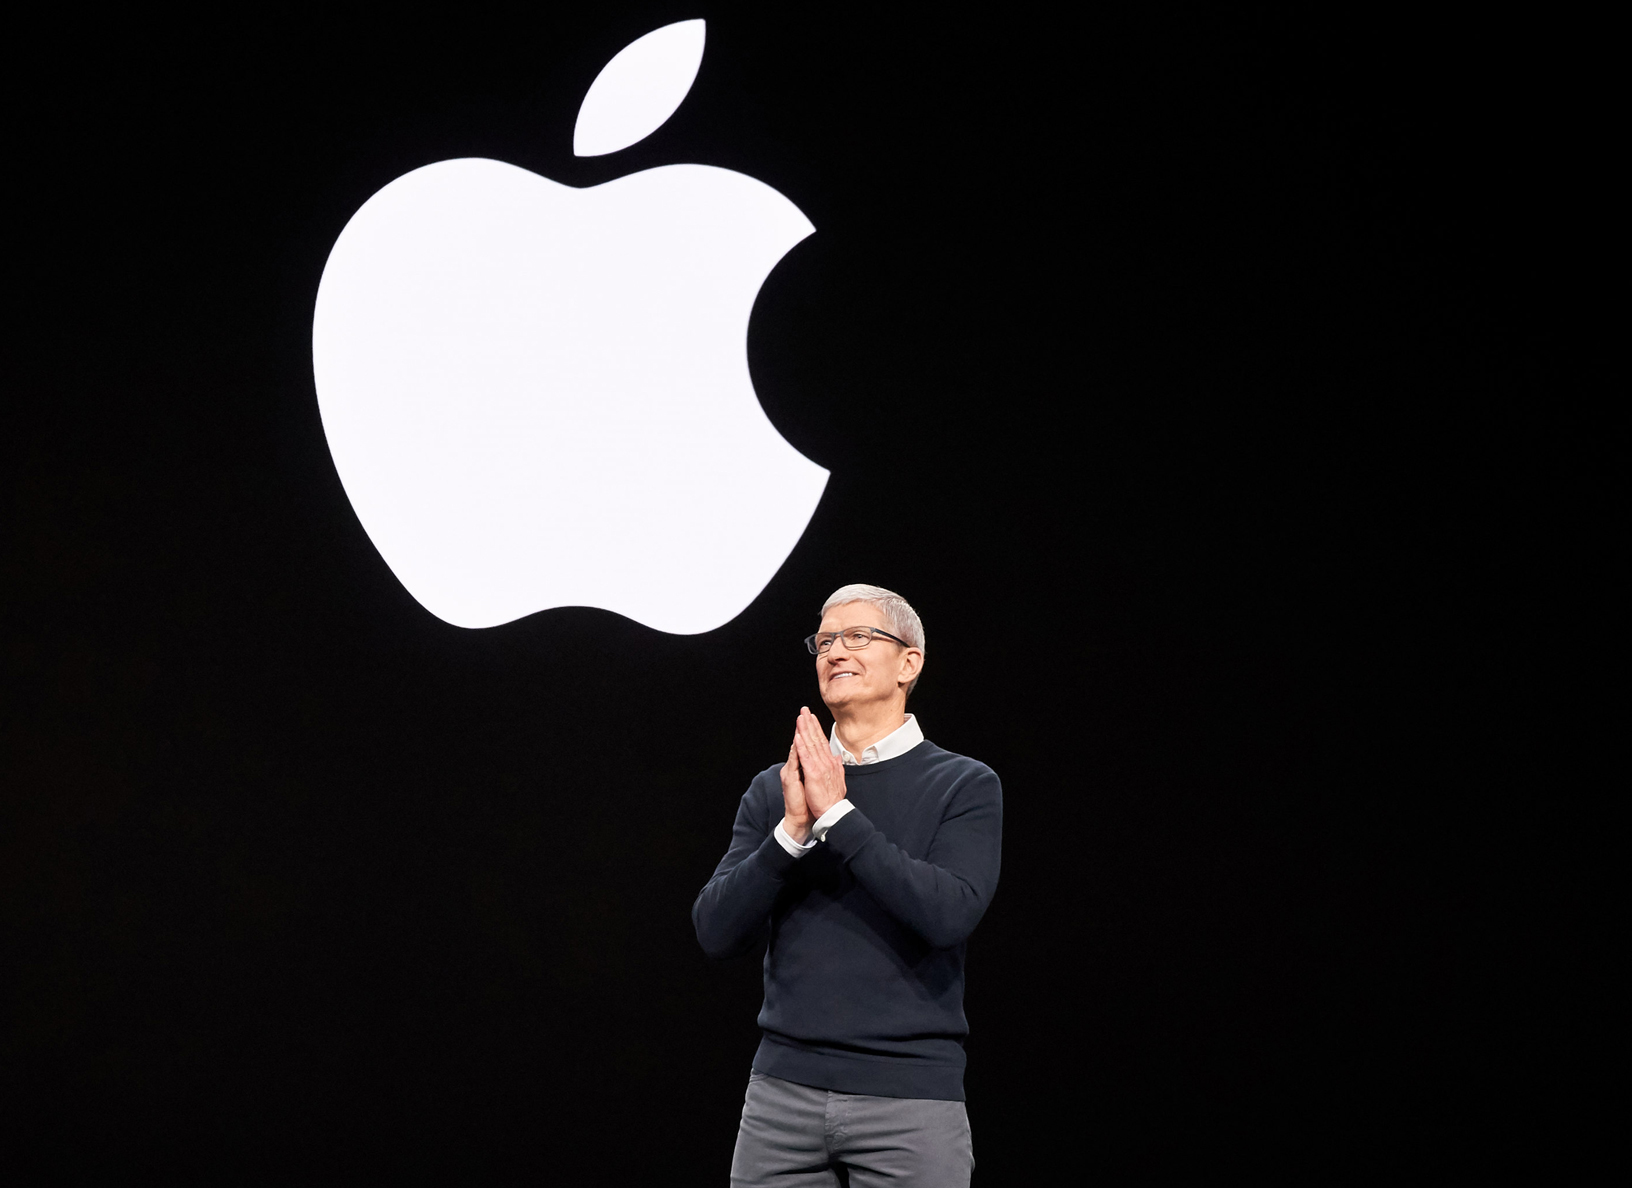 Apple Shifts Focus to More Affordable Vision Model Amidst Cost Reduction Challenges